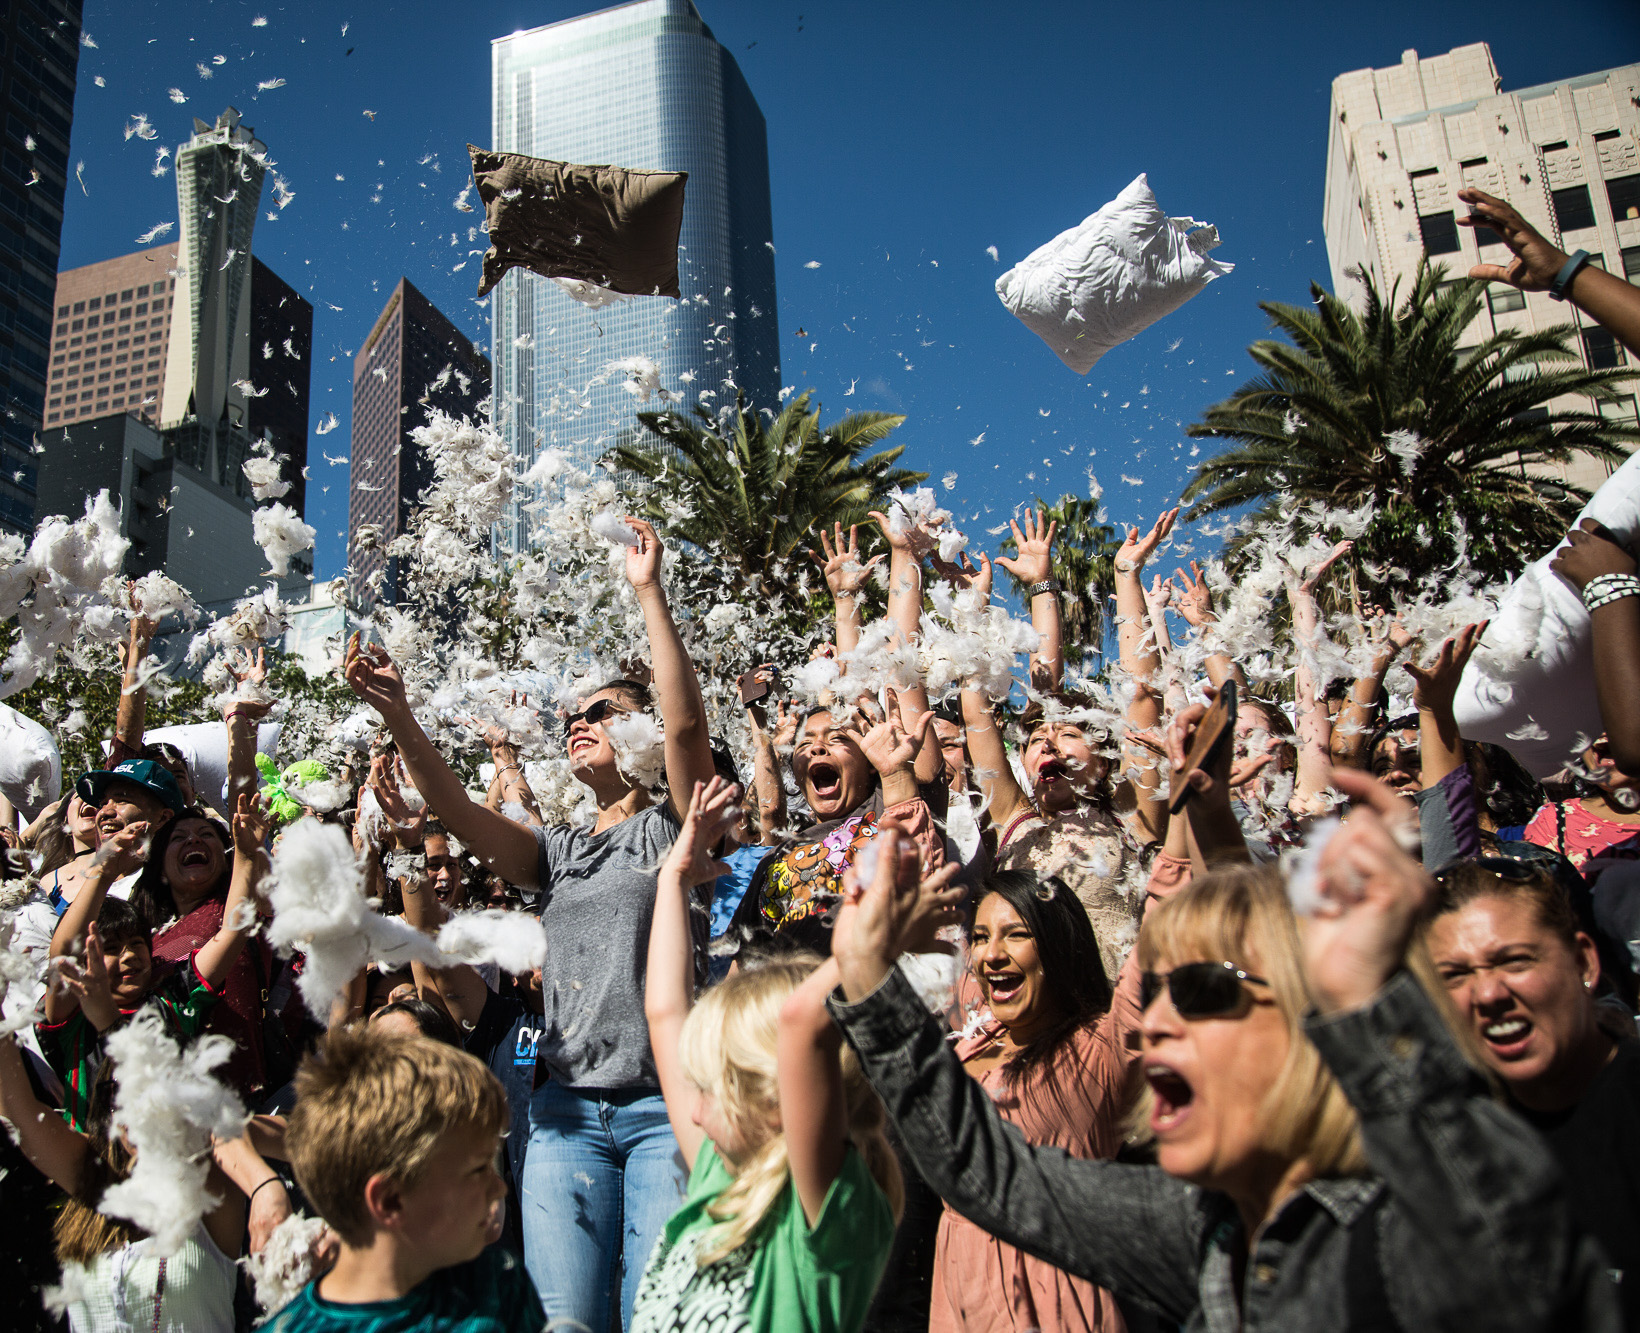  Participants of the International Pillow Fight Day cheer and scream while throwing pillows and feathers in the air in Pershing Square in Downtown Los Angles on Saturday, April 1 2017. Hundreds of people traded soft blows in a giant pillow fight that